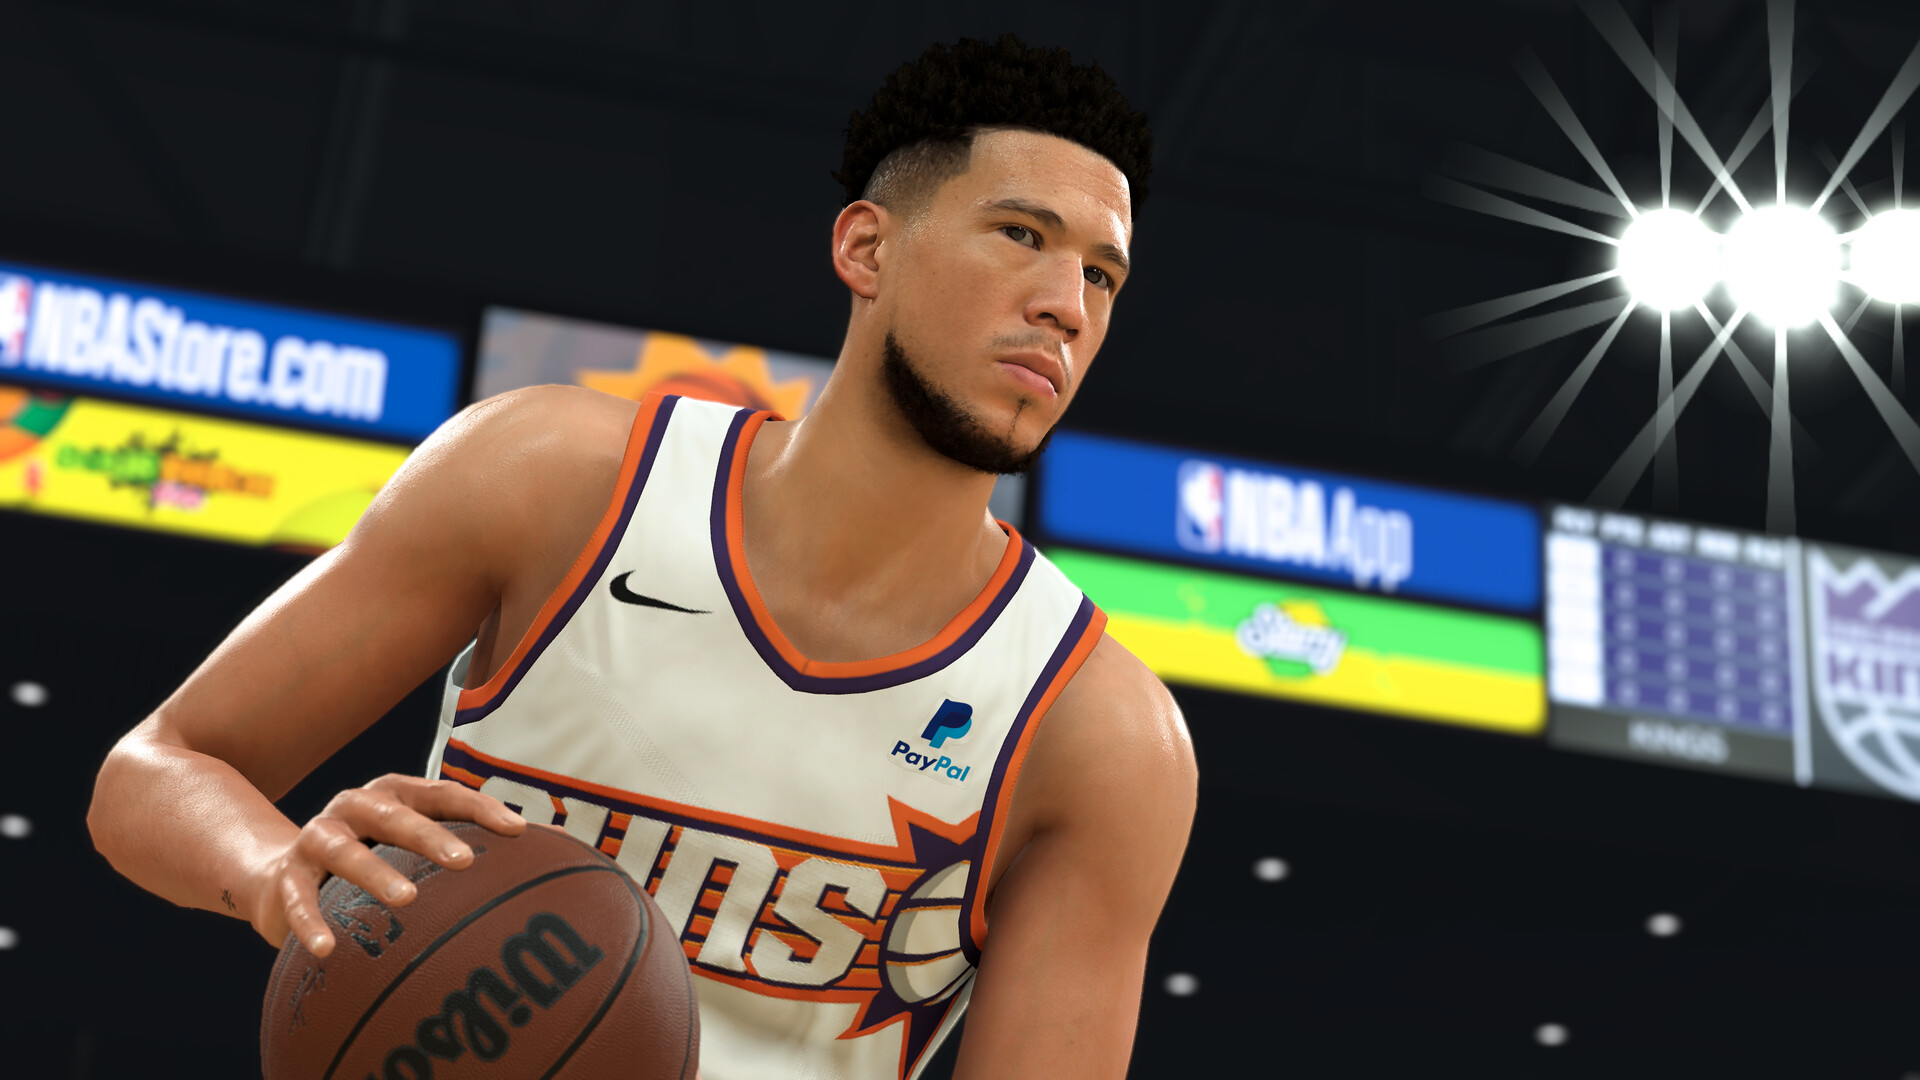 HOW TO DOWNLOAD & INSTALL NBA 2K23 IN STEAM